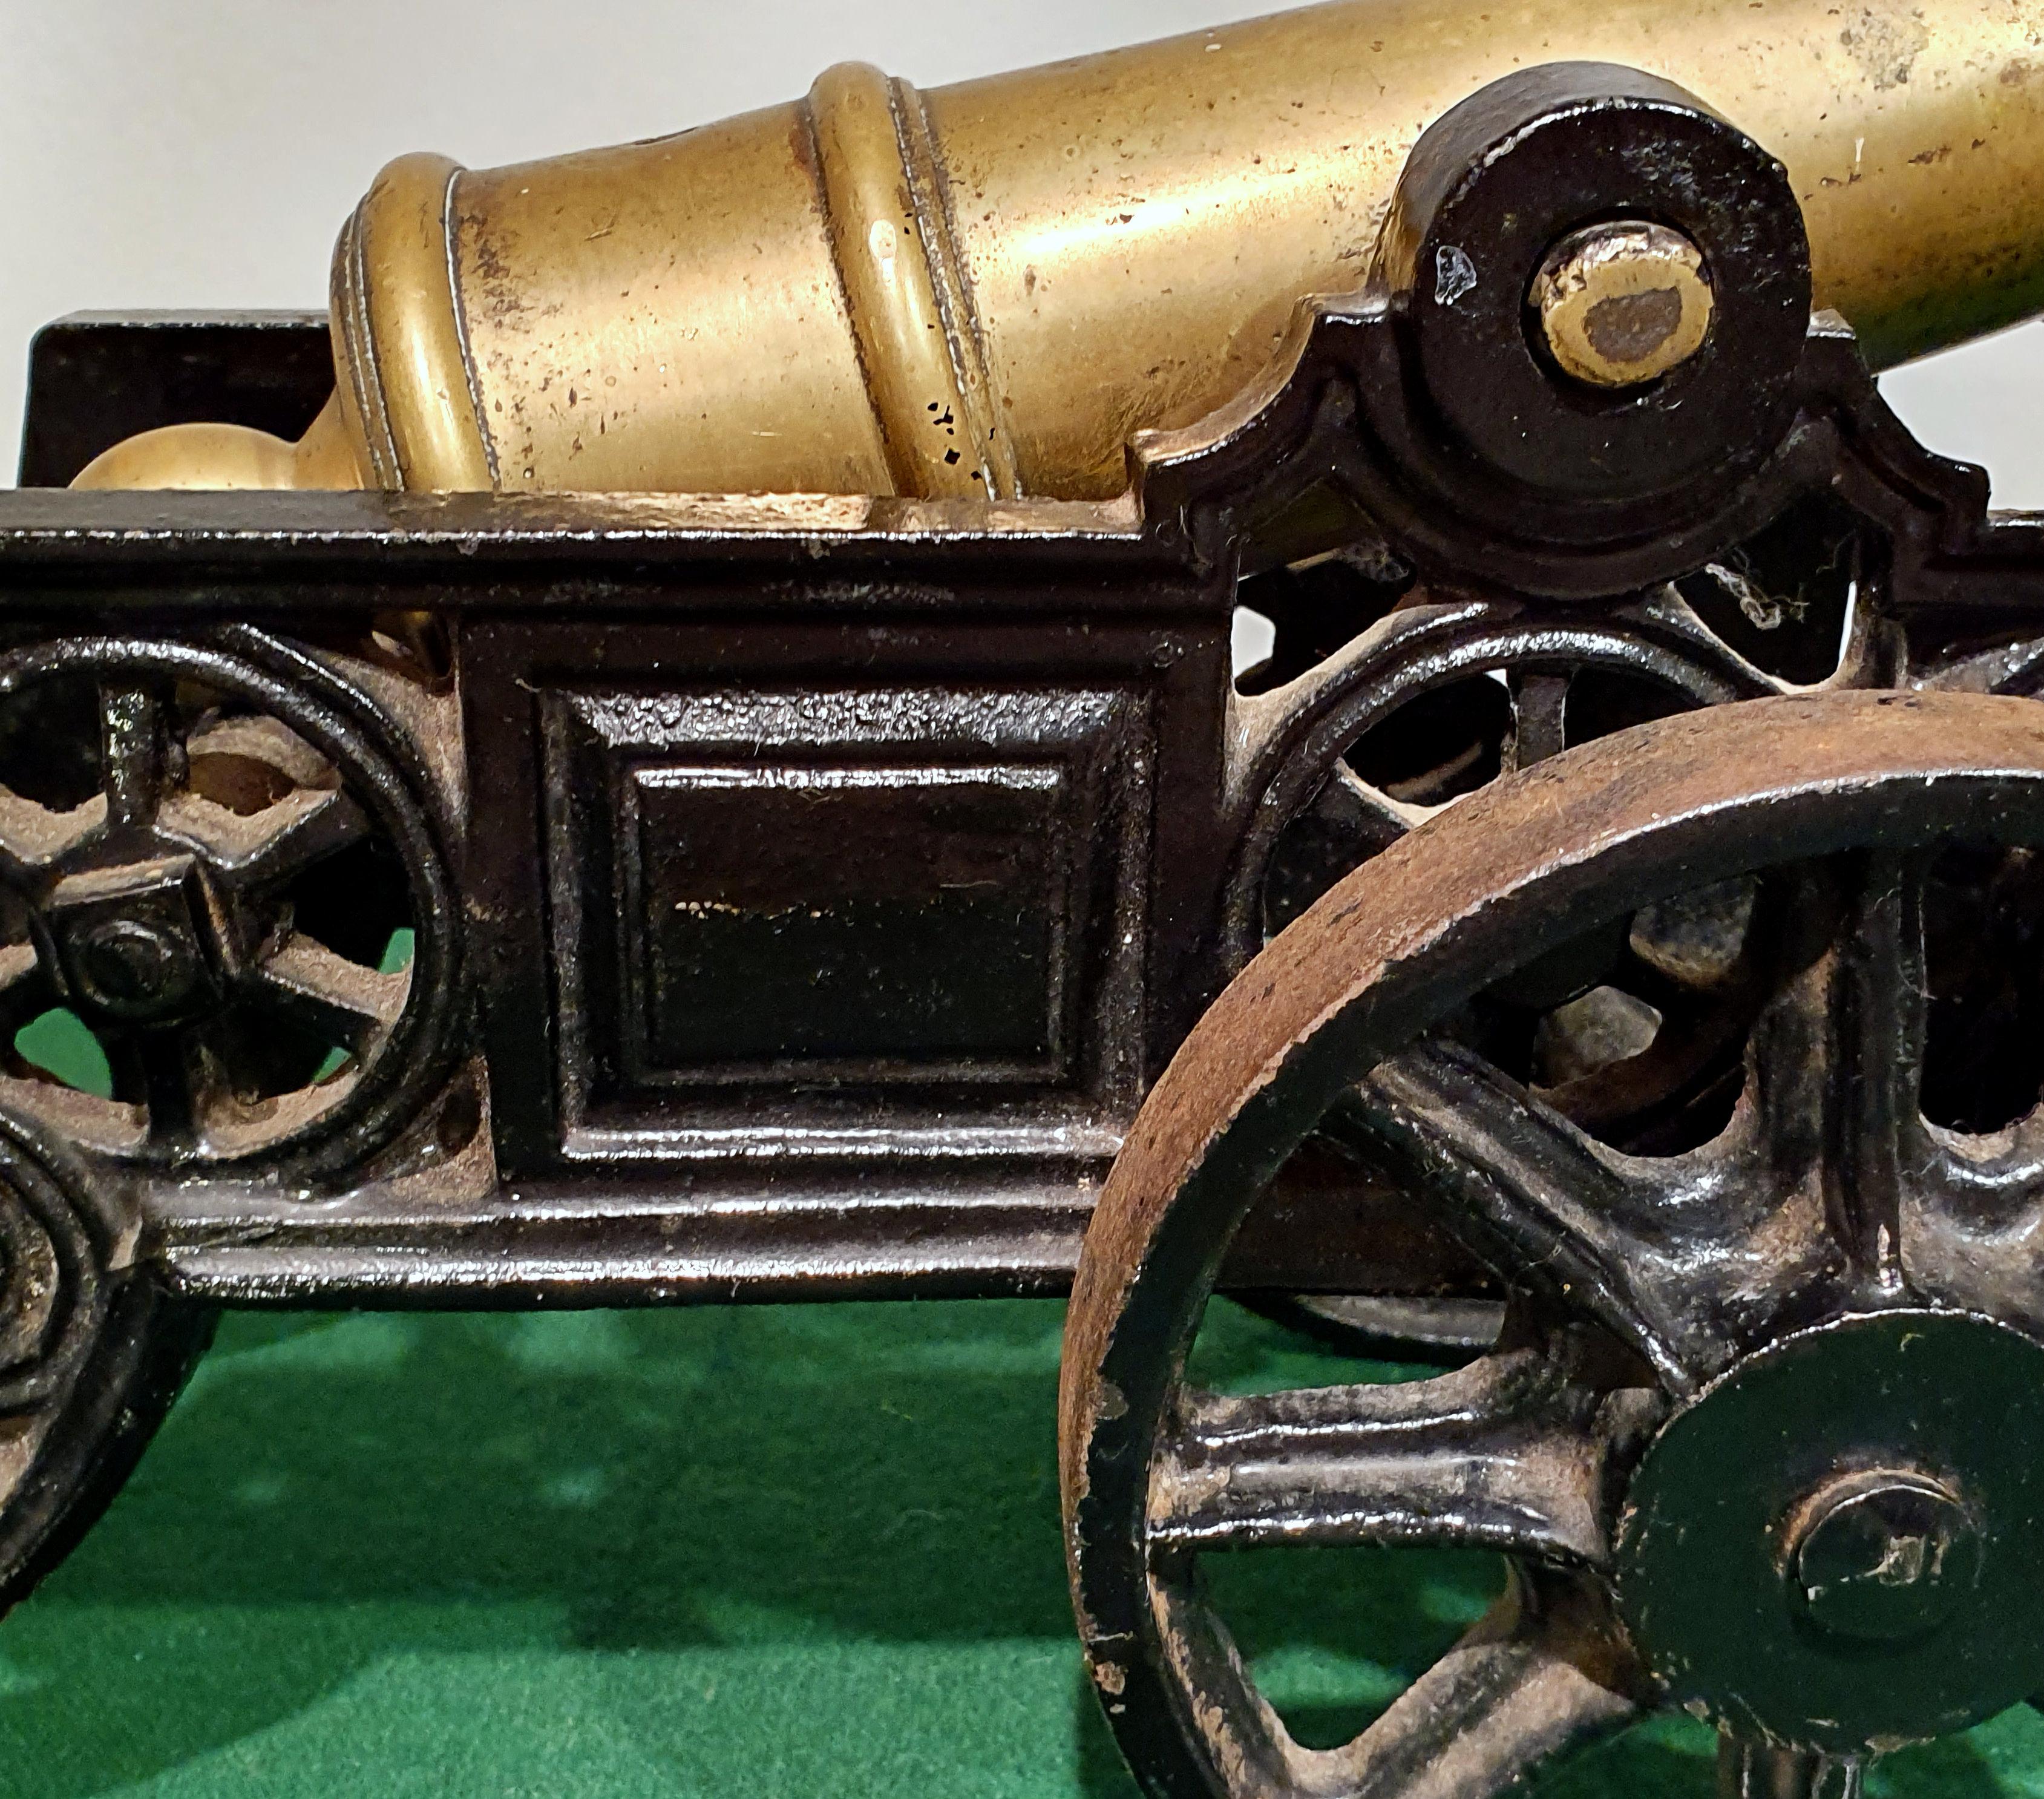 Early 20th Century English Model of a Starting Cannon For Sale 4